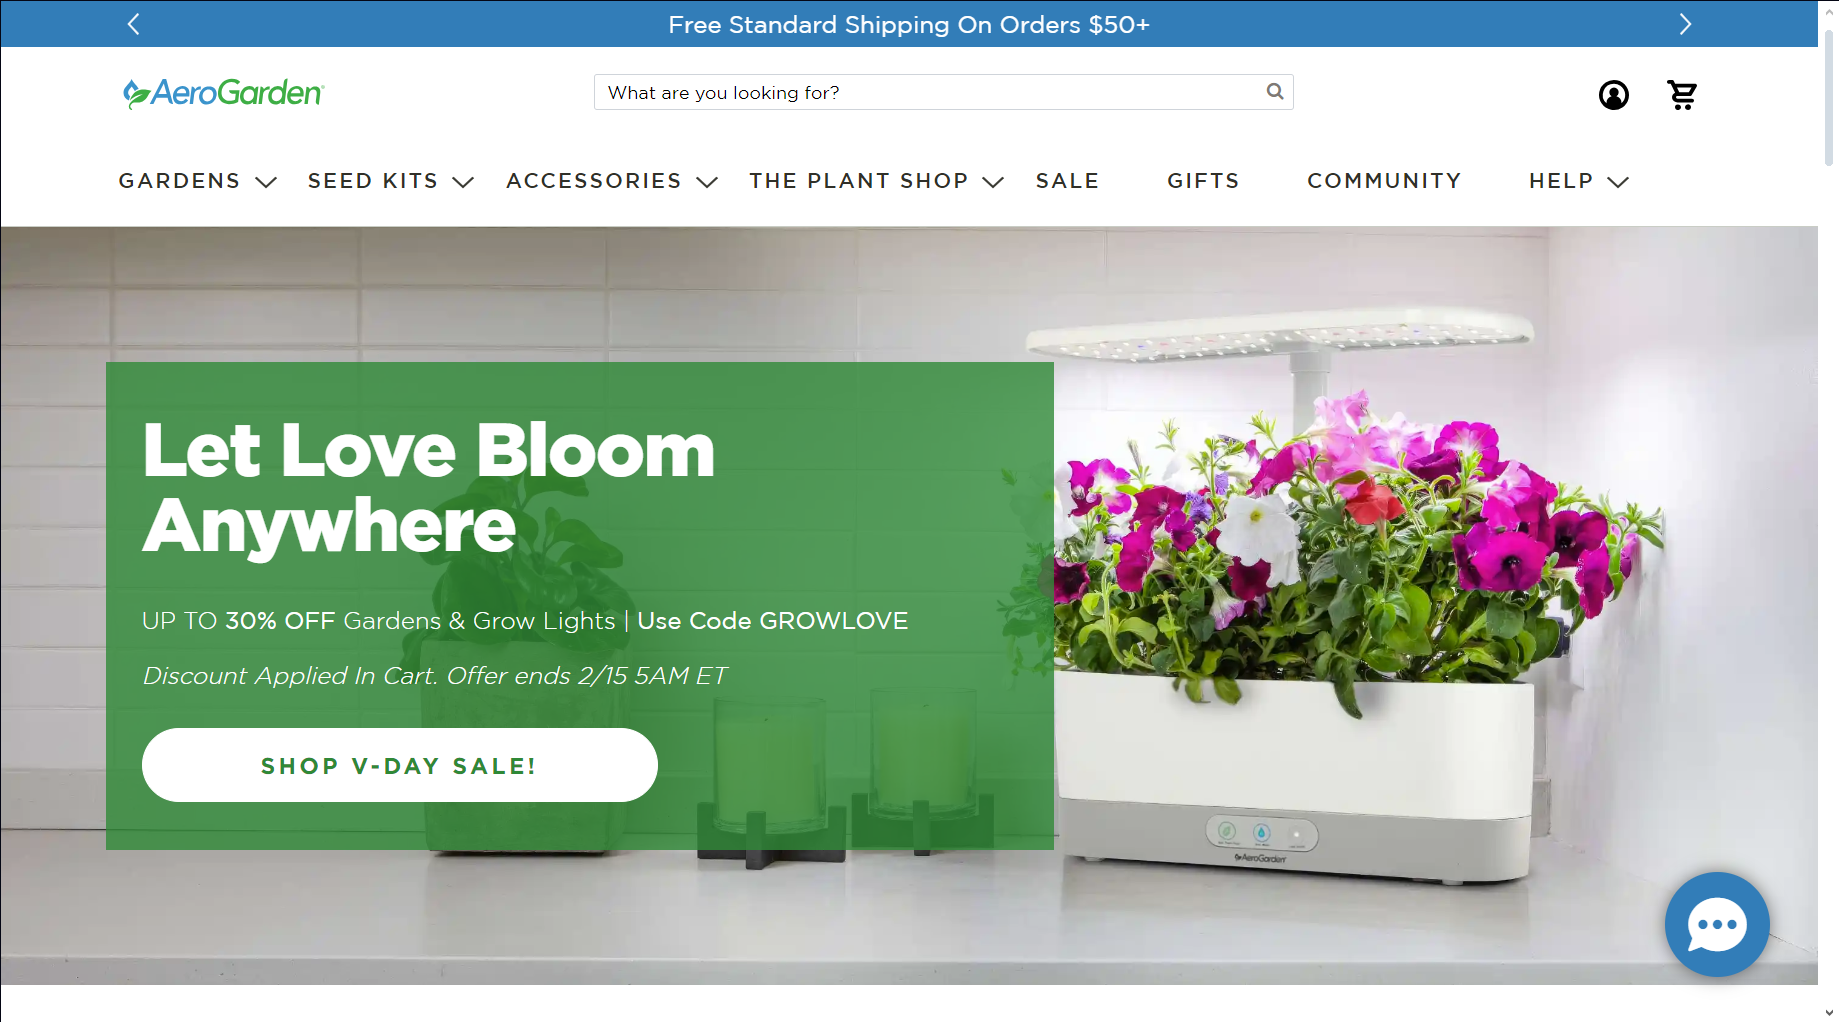 Visit Aerogarden for Awesome Valentine’s Day Deals